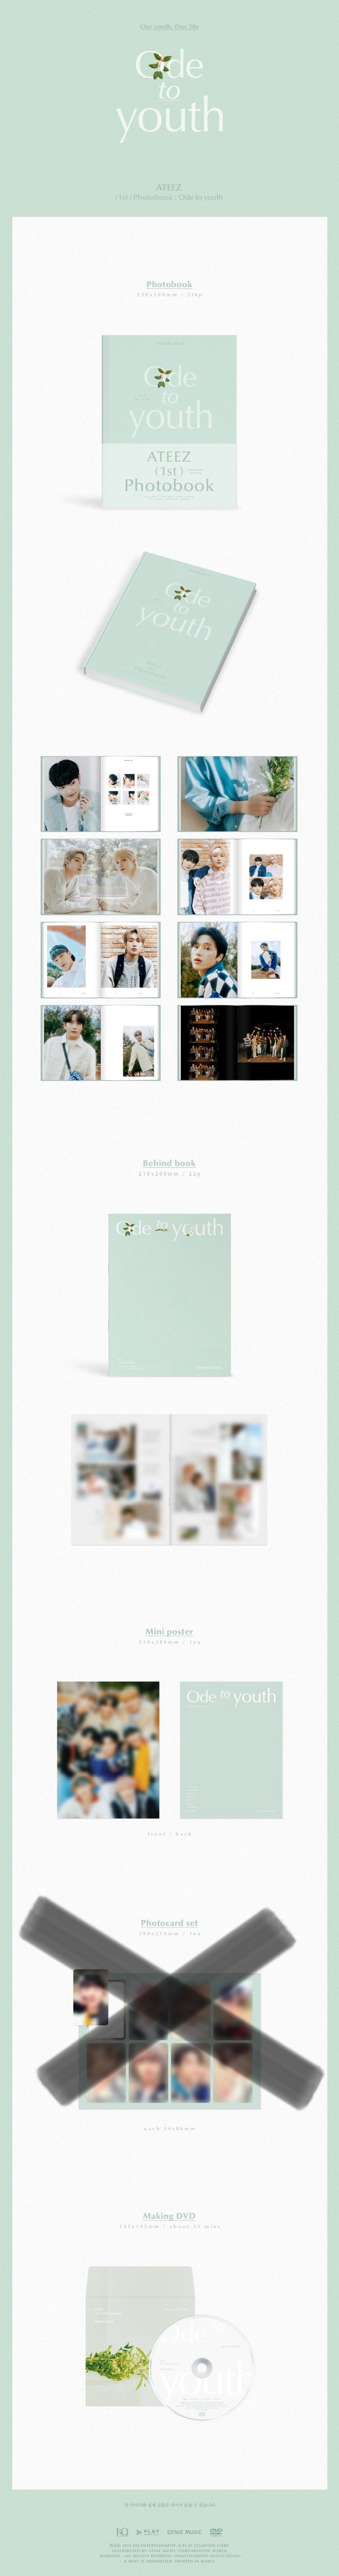 Ateez 1st Photobook - Ode to Youth